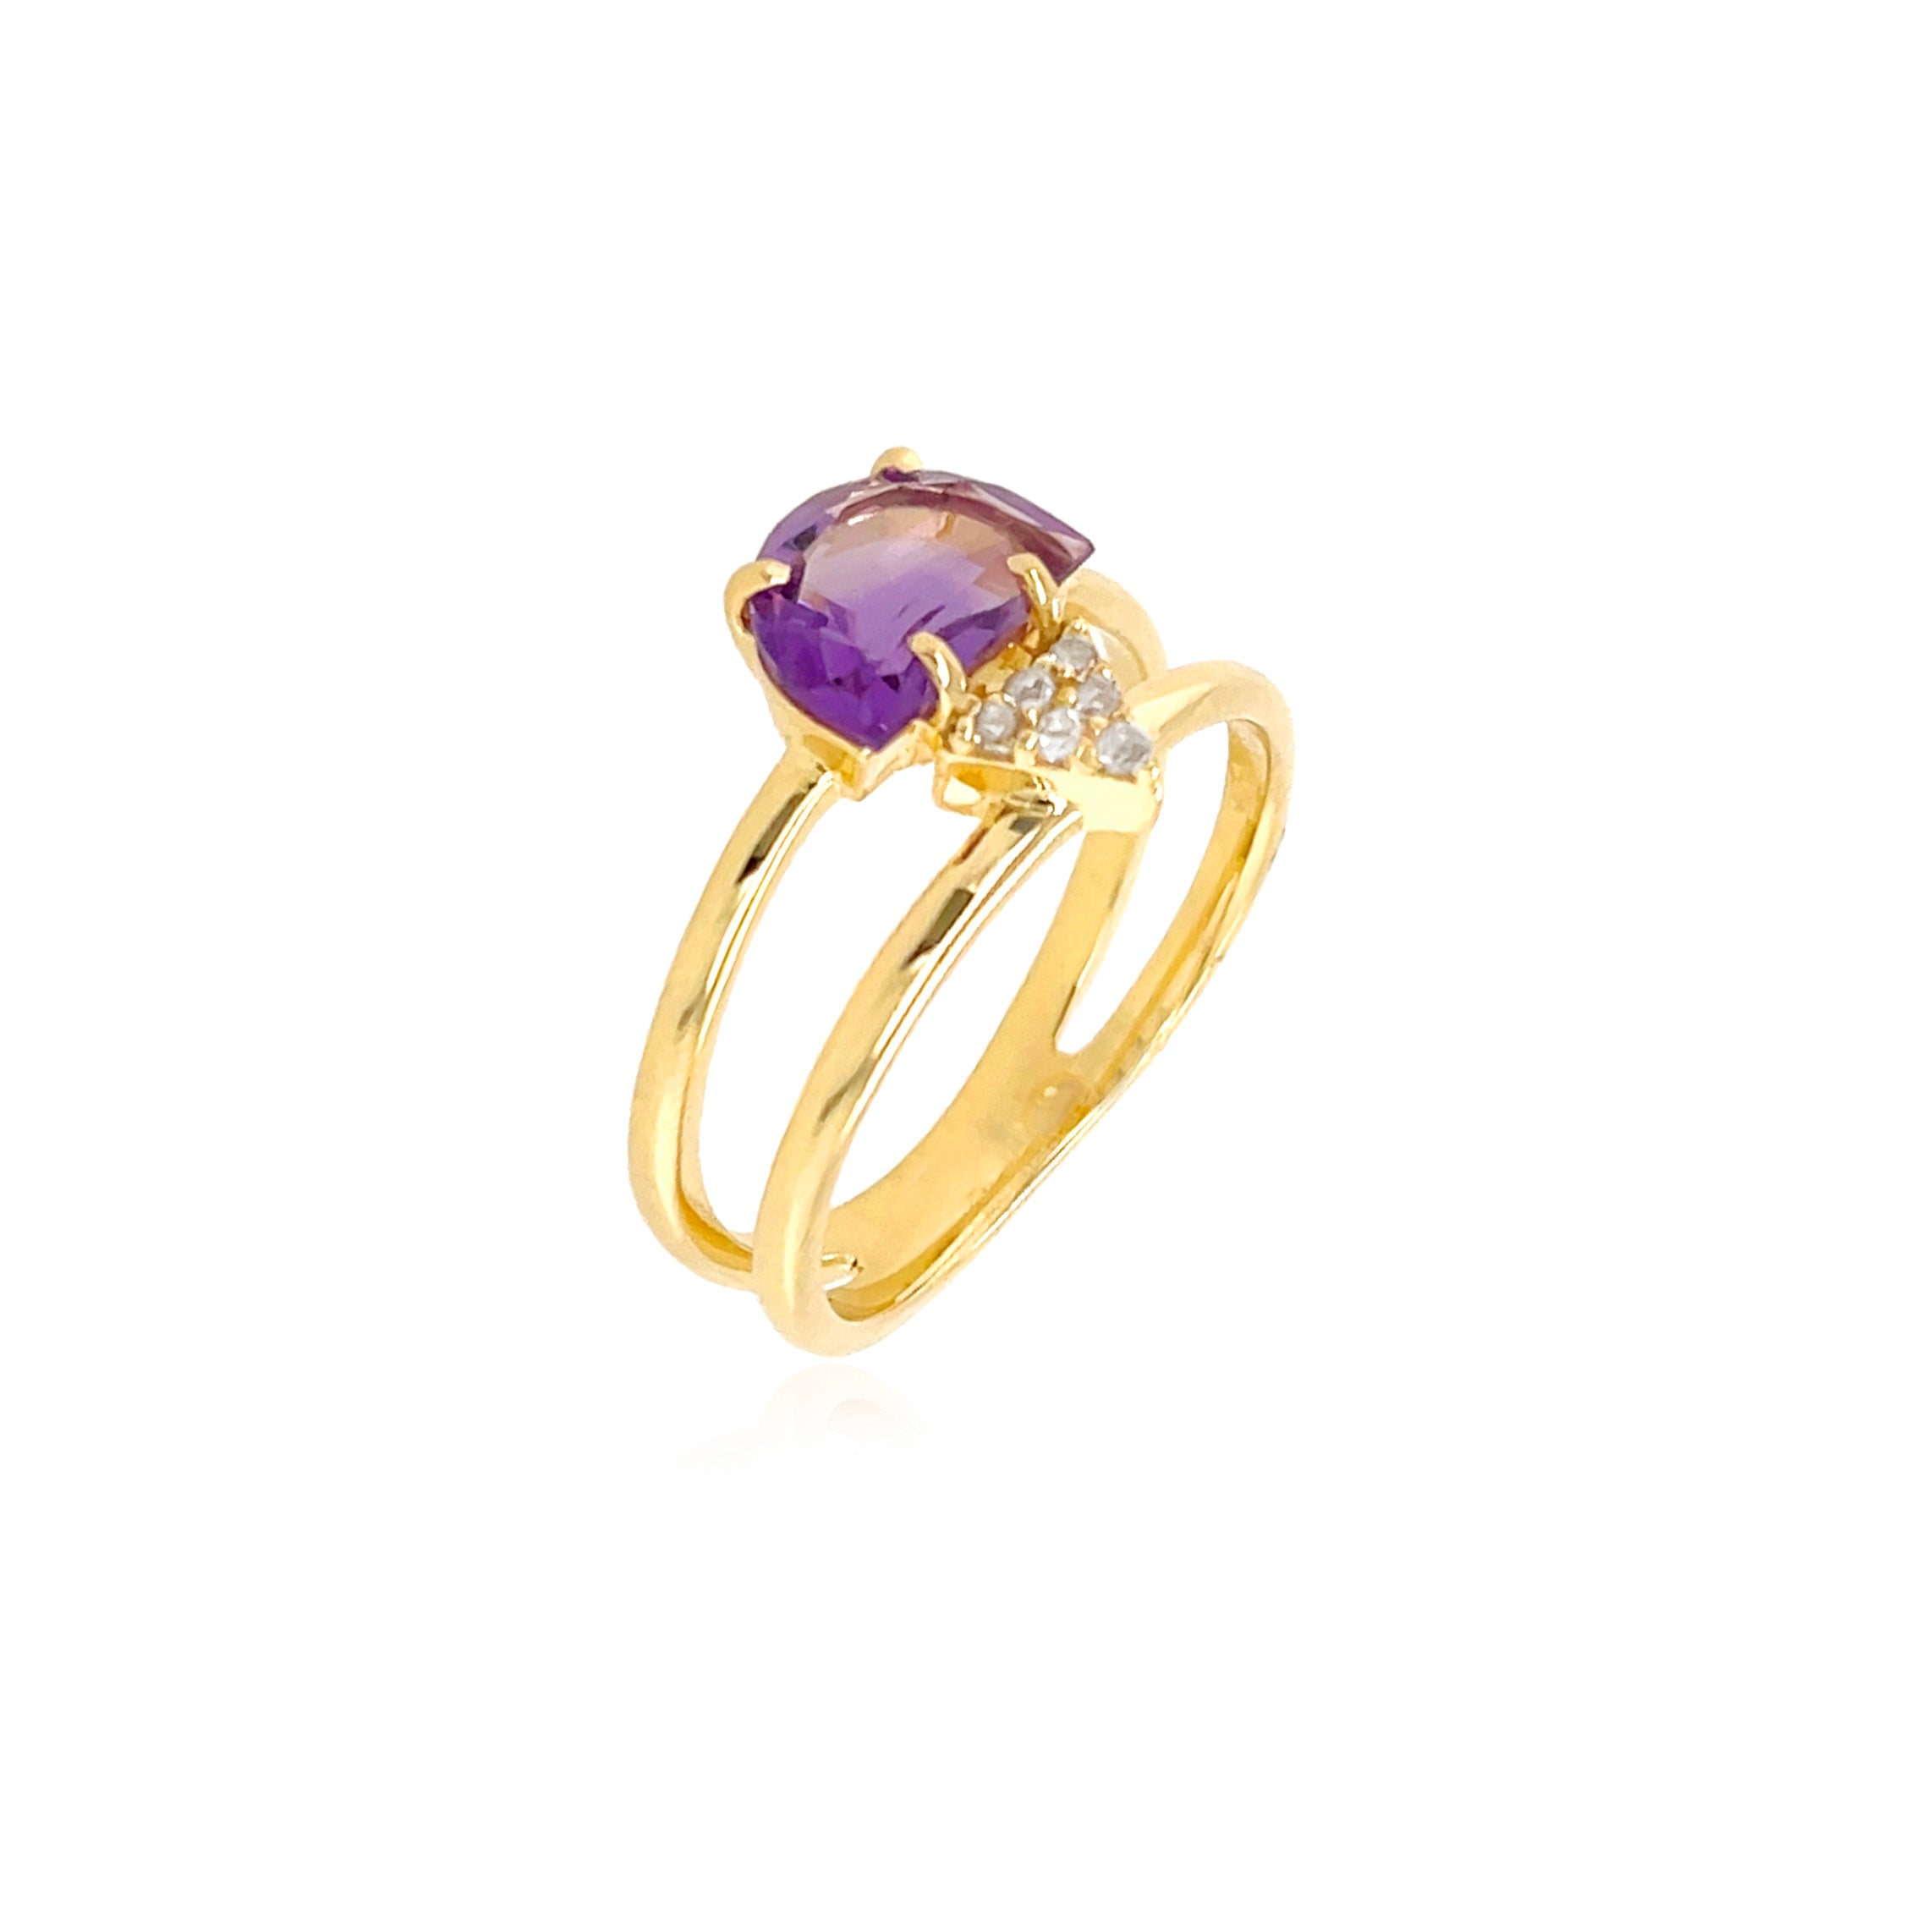 From our Brazilian collection  Round diamonds & amethyst stone.  Three row ring   8.00 mm wide  18k yellow gold